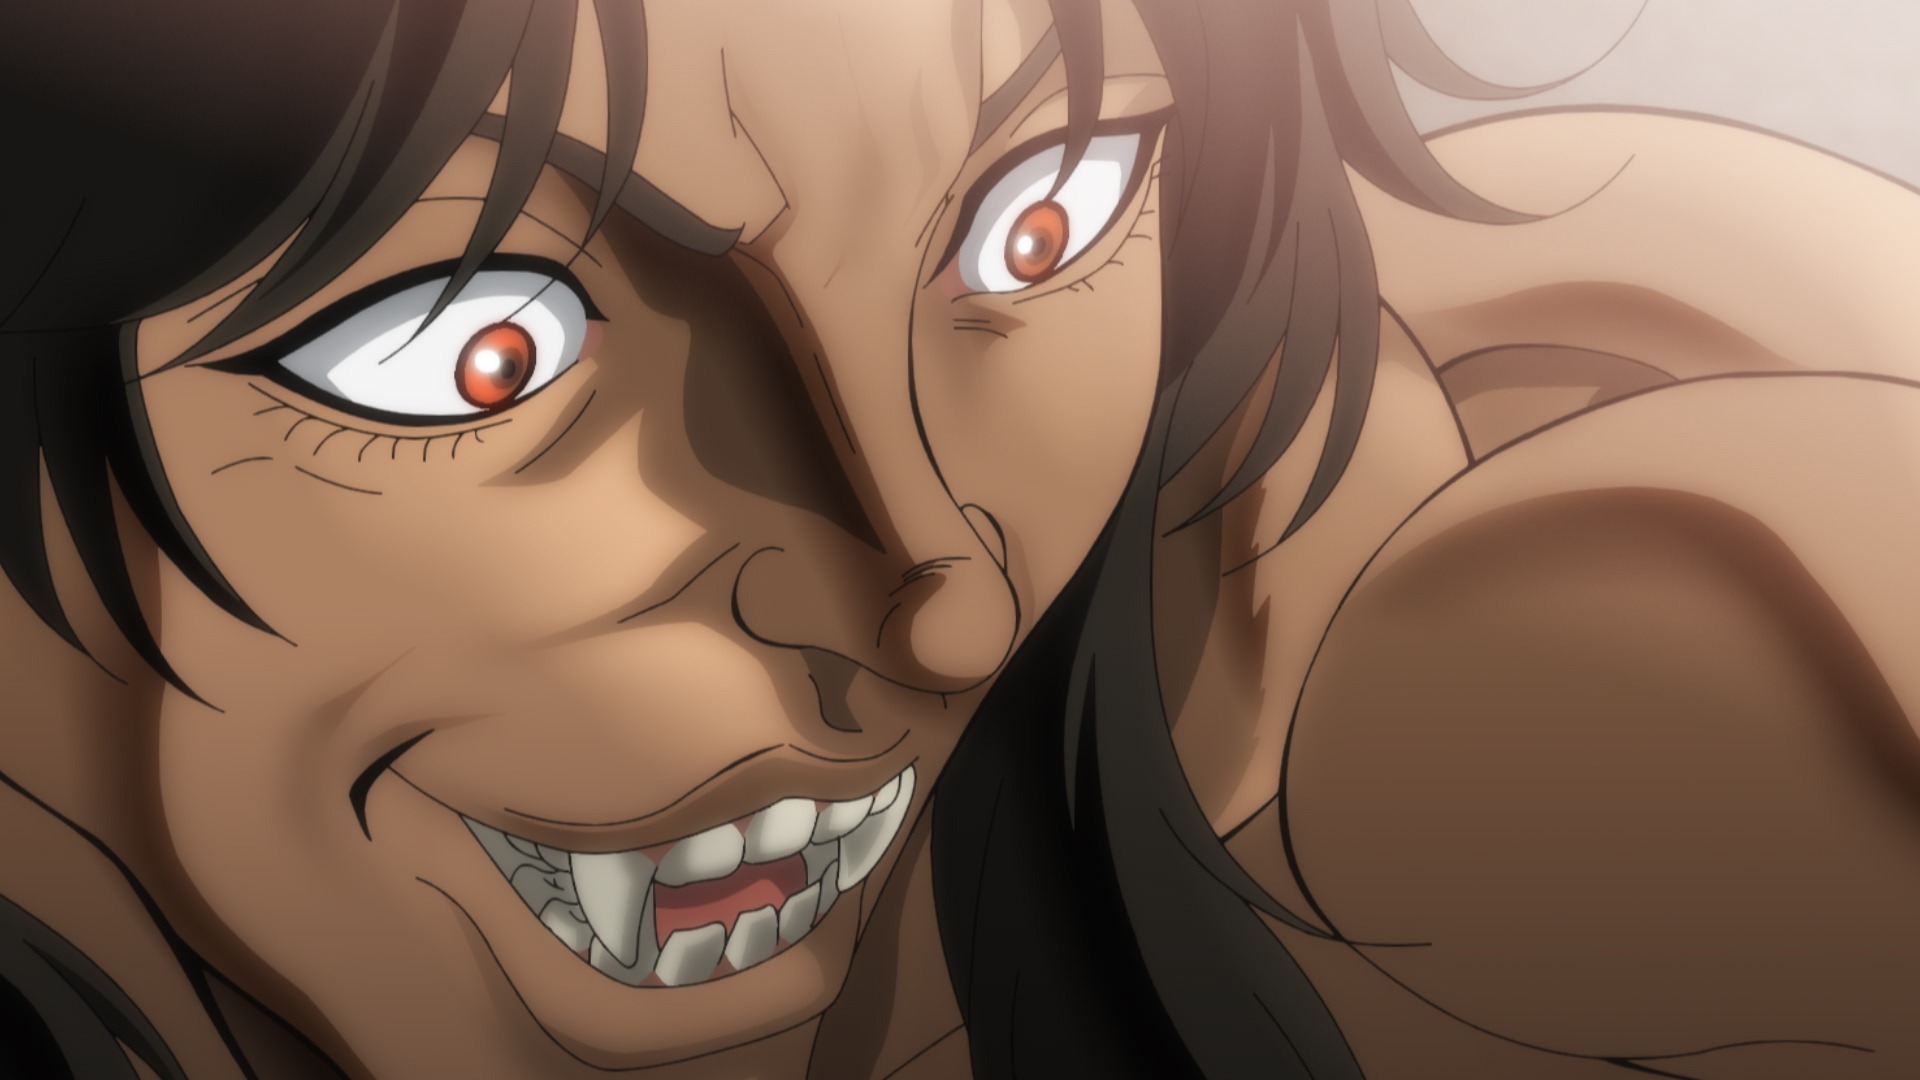 Baki Hanma Has The Most Exciting, Ridiculous Battles In Anime-demhanvico.com.vn